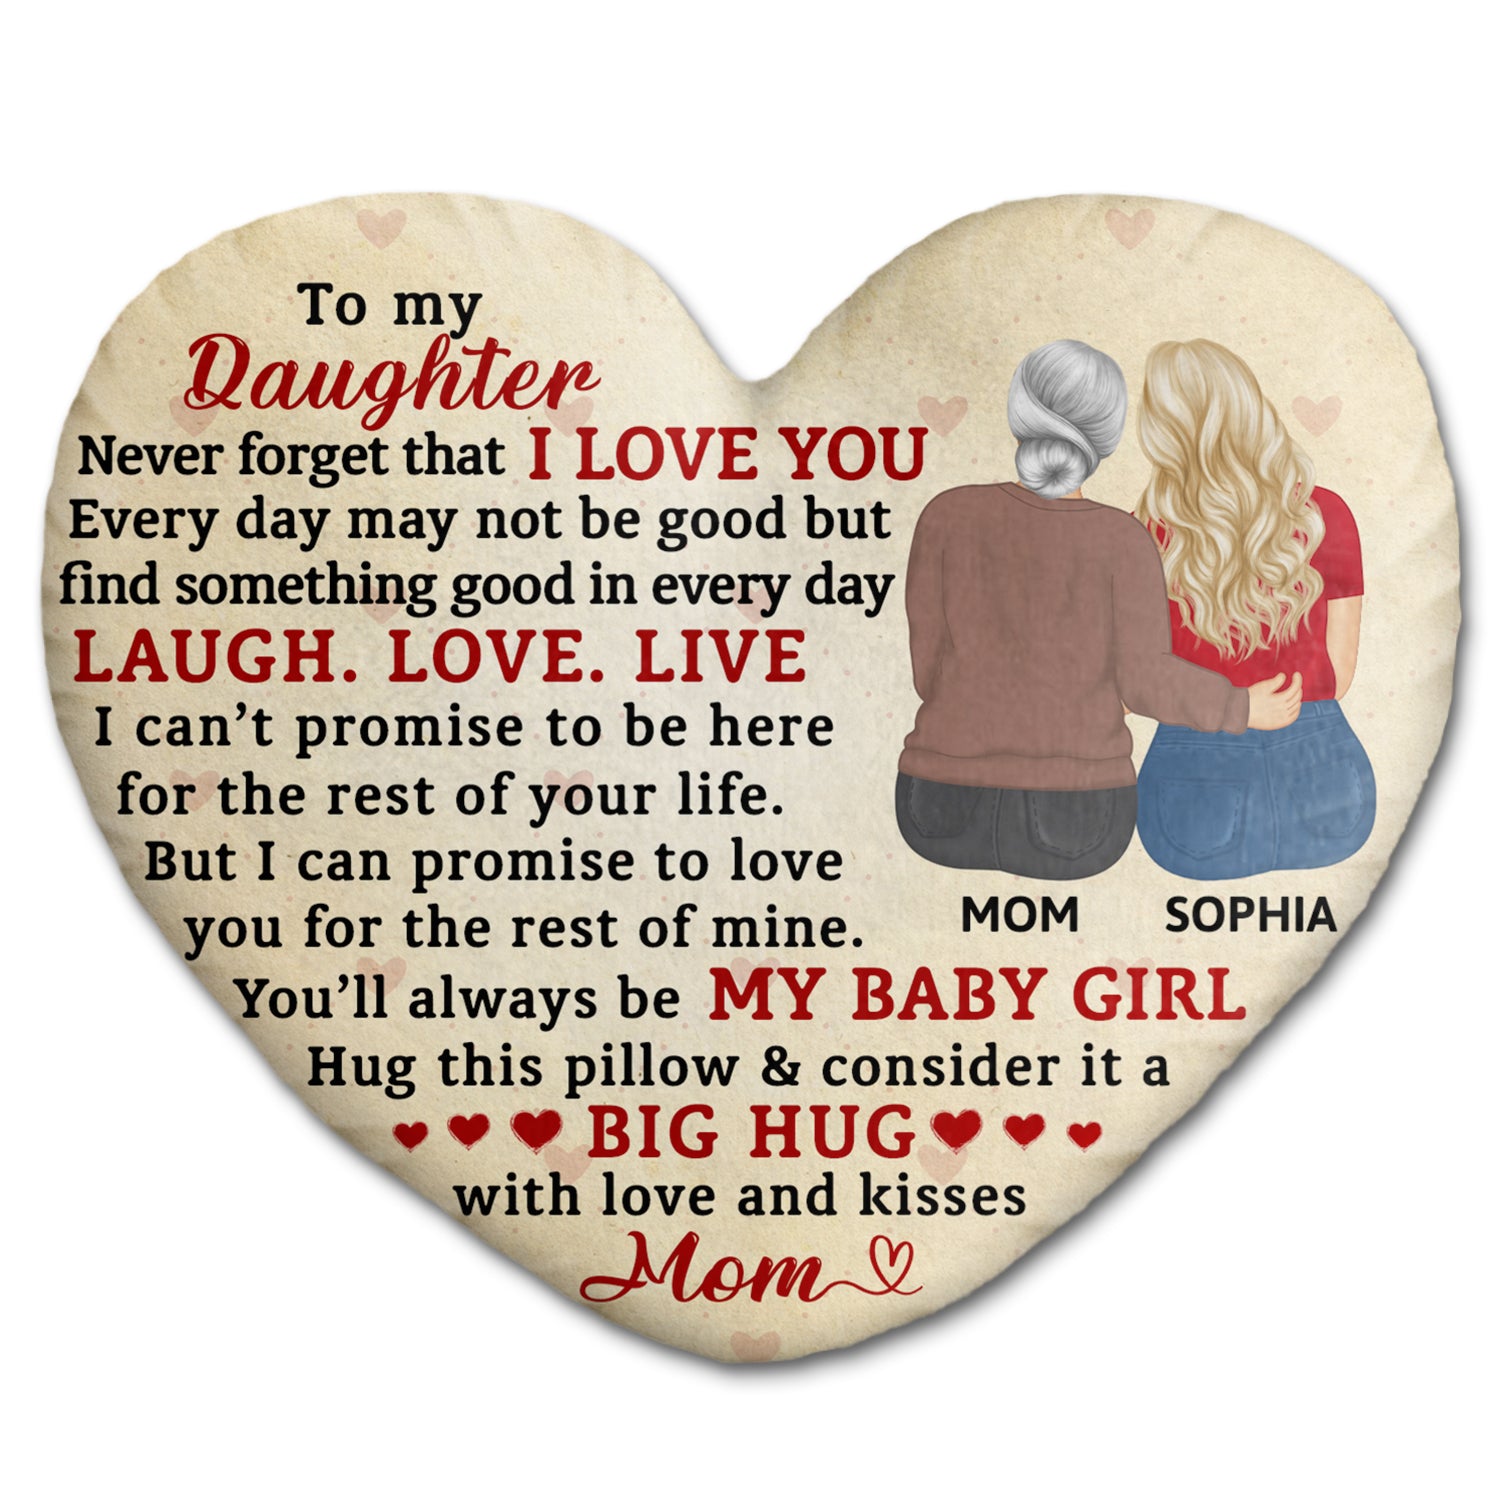 Never Forget That I Love You Mom - Gift For Daughters - Personalized Heart Shaped Pillow